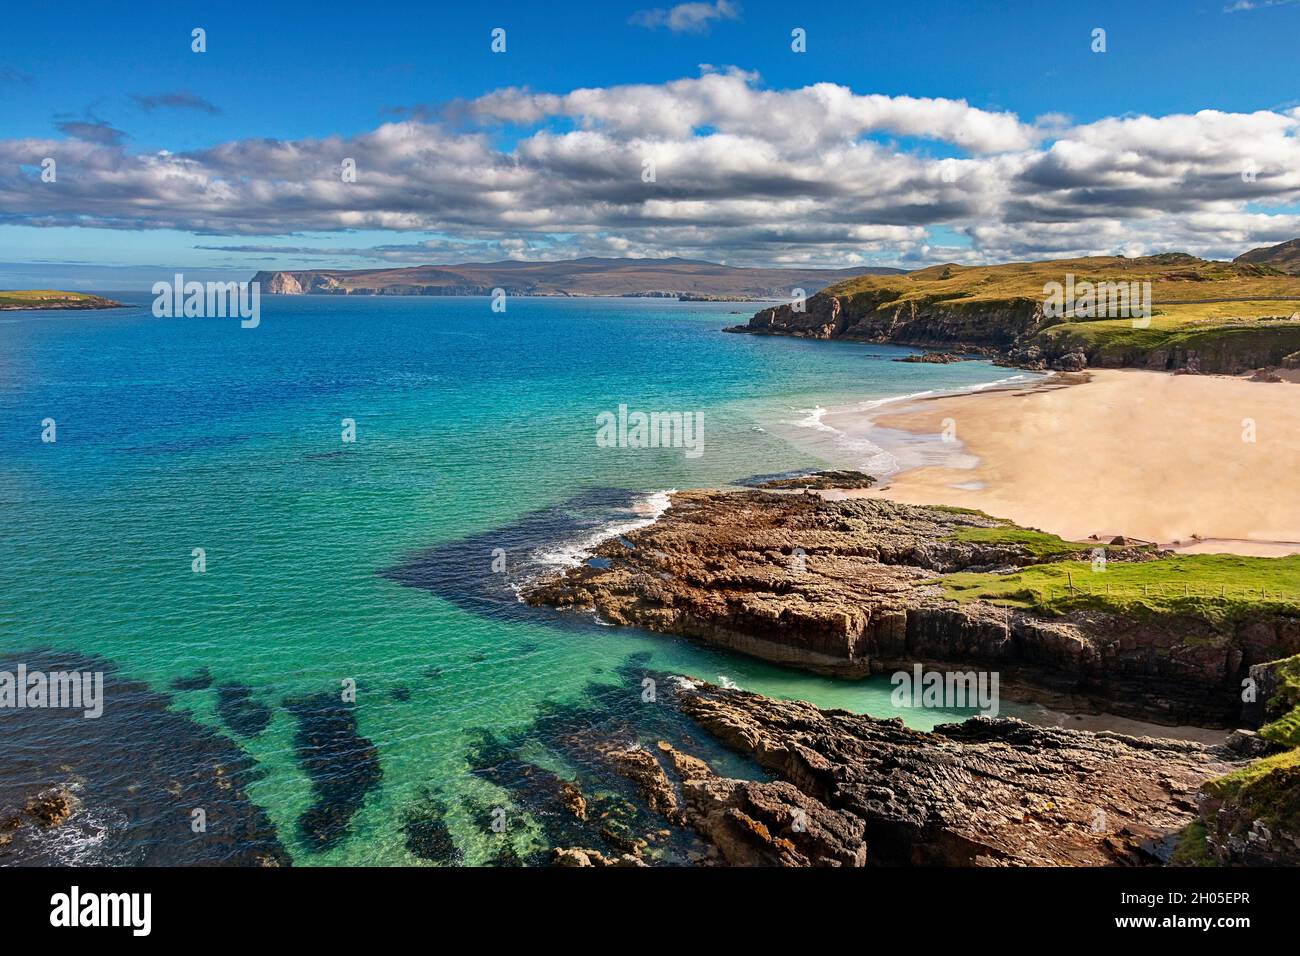 DURNESS SUTHERLAND SCOTLAND A SANDY BEACH ROCKS  A BLUE SKY AND A TURQUOISE SEA IN LATE SUMMER Stock Photo